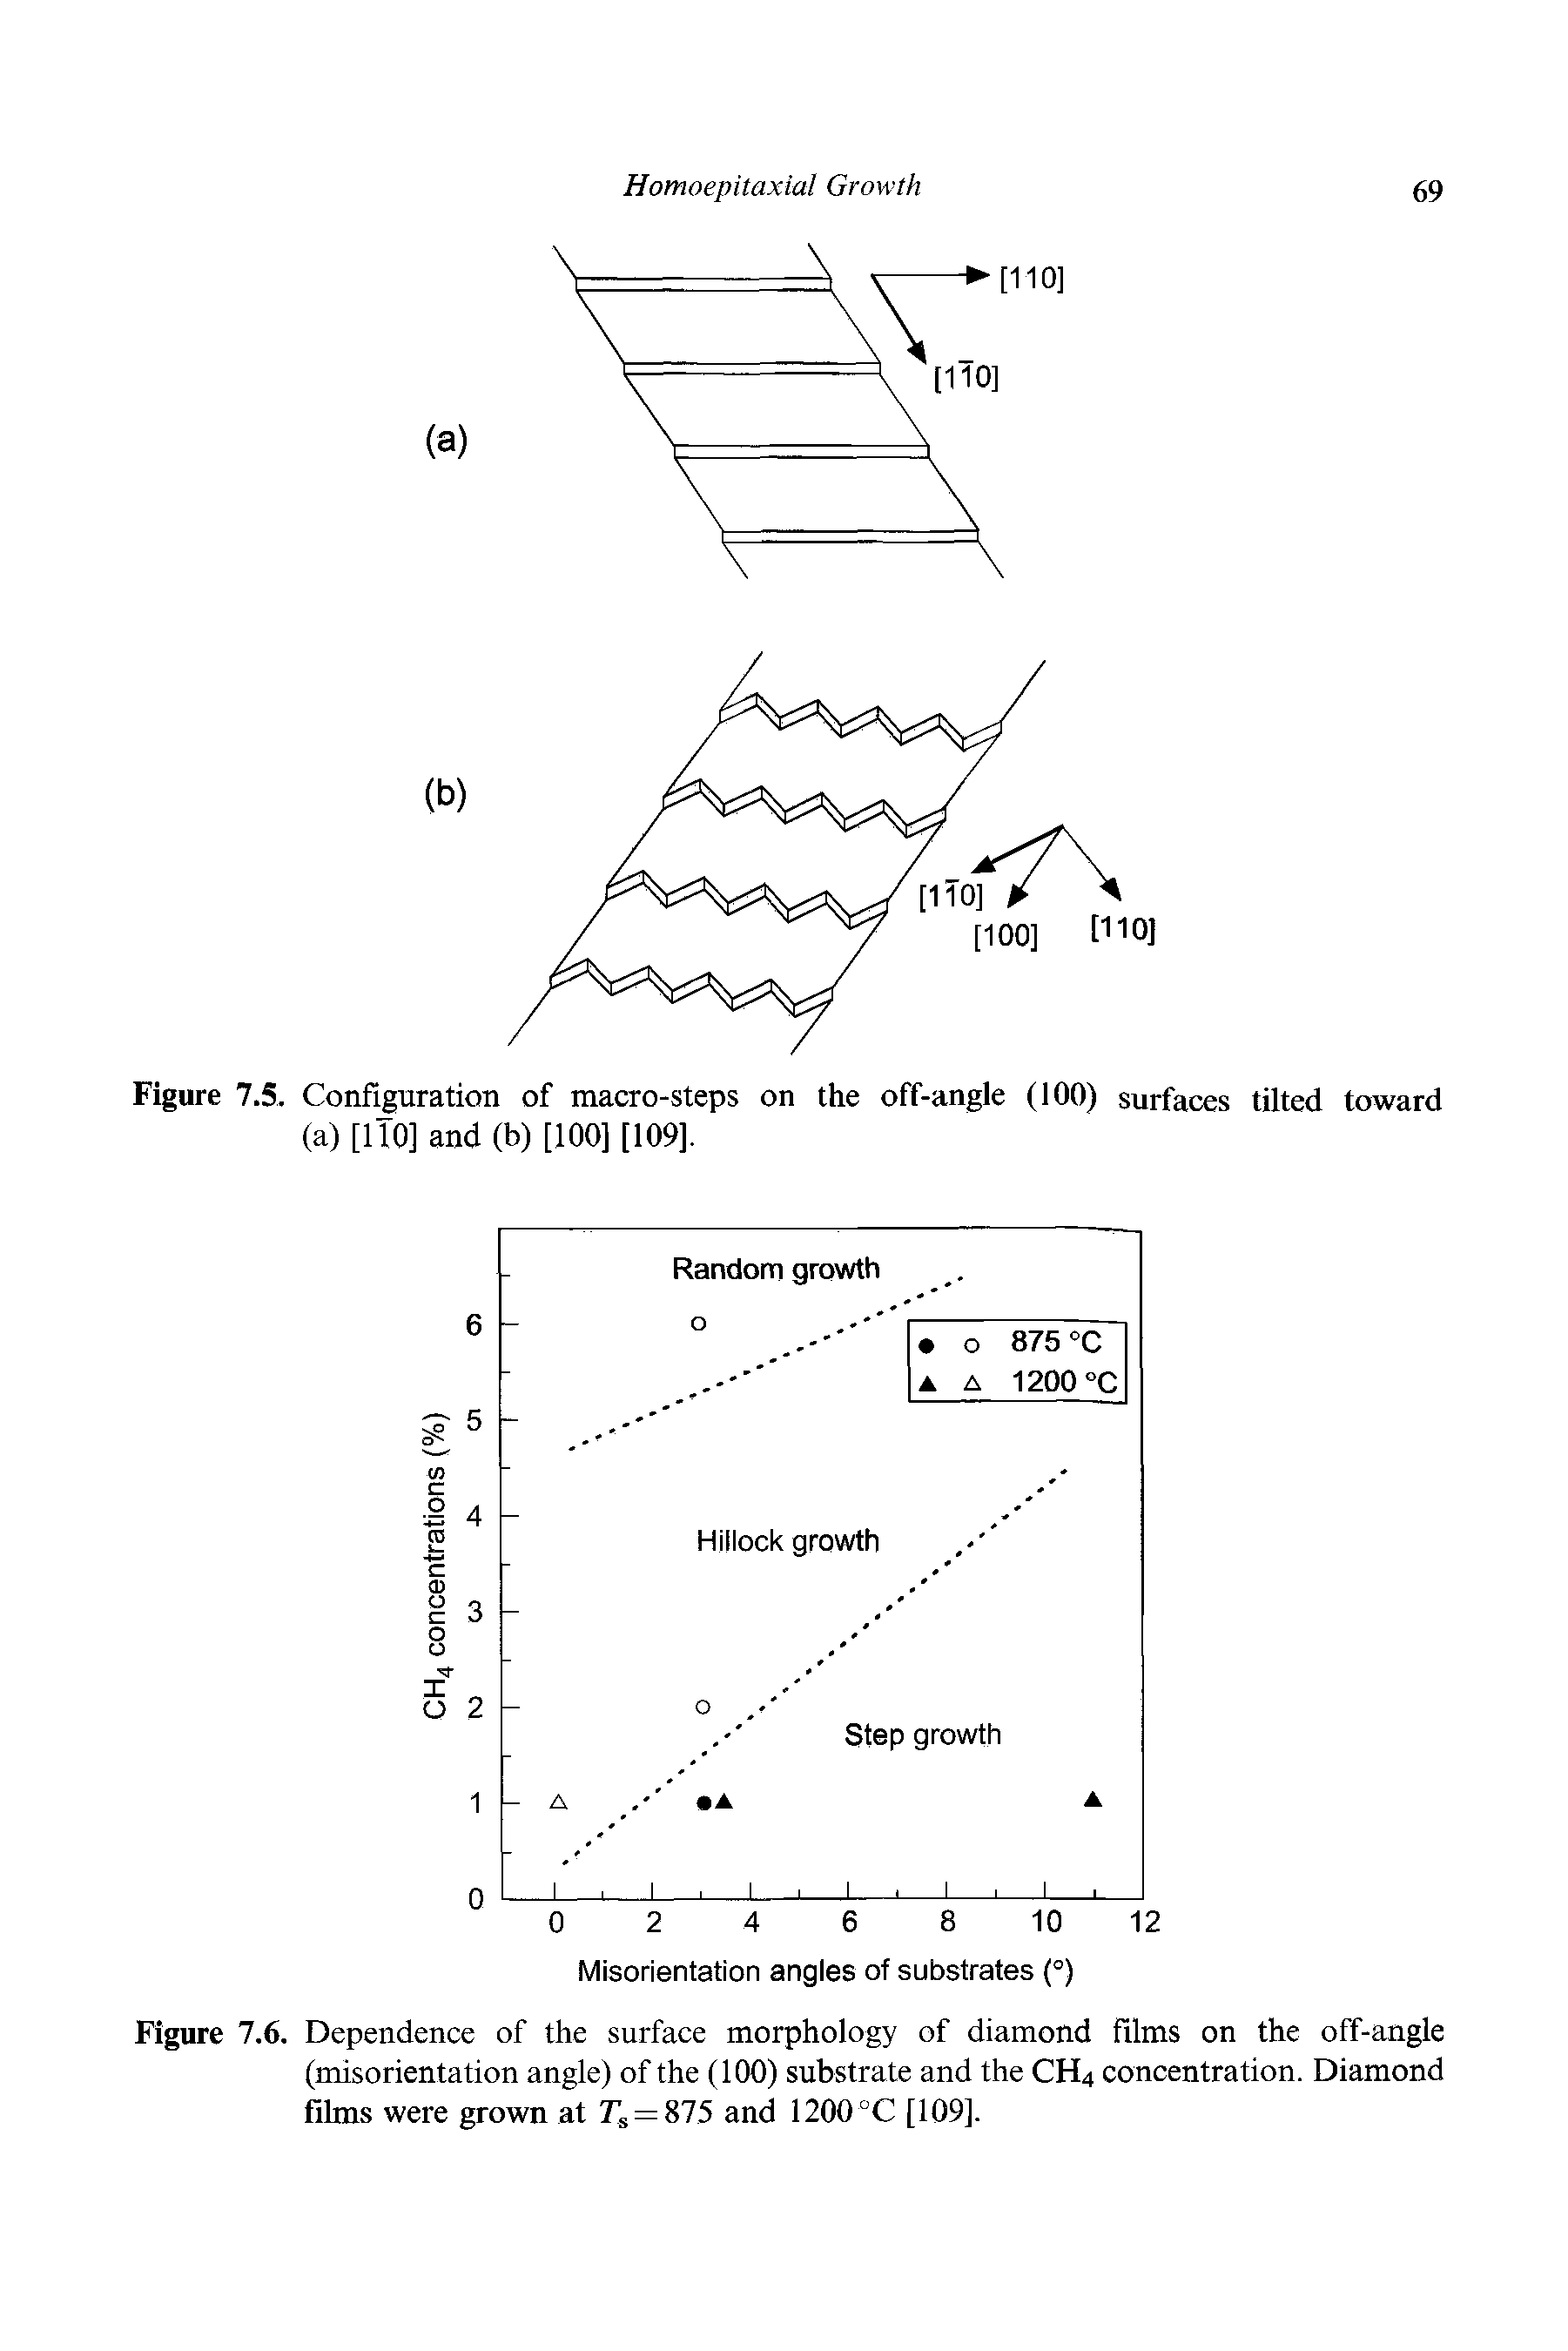 Figure 7.6. Dependence of the surface morphology of diamond films on the off-angle (misorientation angle) of the (100) substrate and the CH4 concentration. Diamond films were grown at Ts = 815 and 1200°C [109].